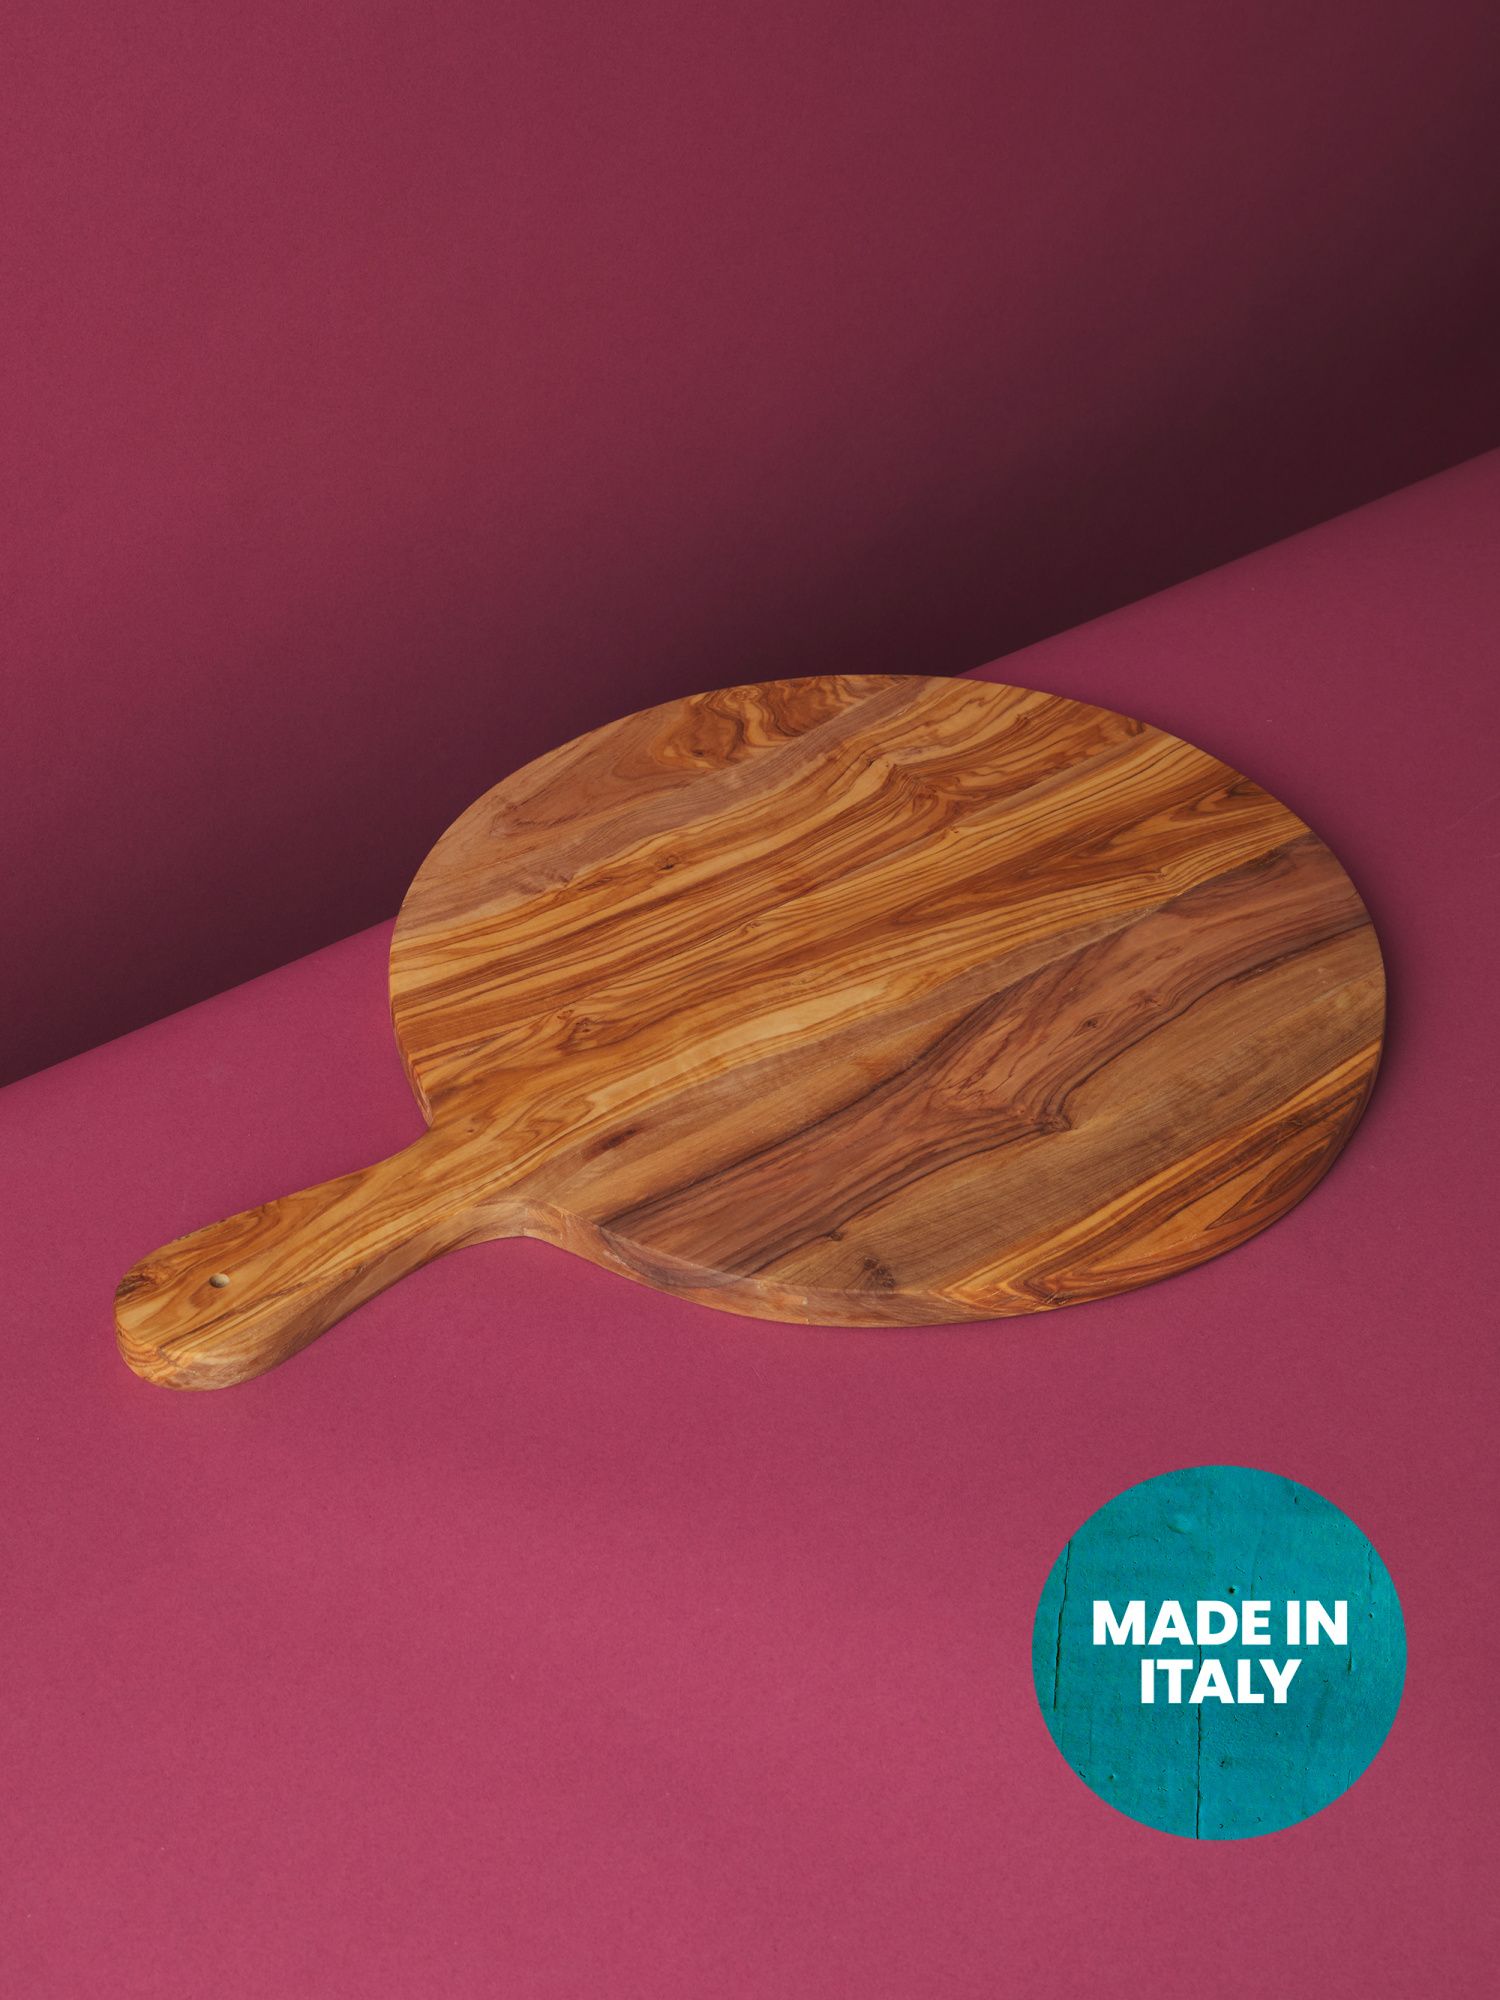 Made In Italy Olive Wood Round Cutting Board With Handle | Gifts For The Host | HomeGoods | HomeGoods